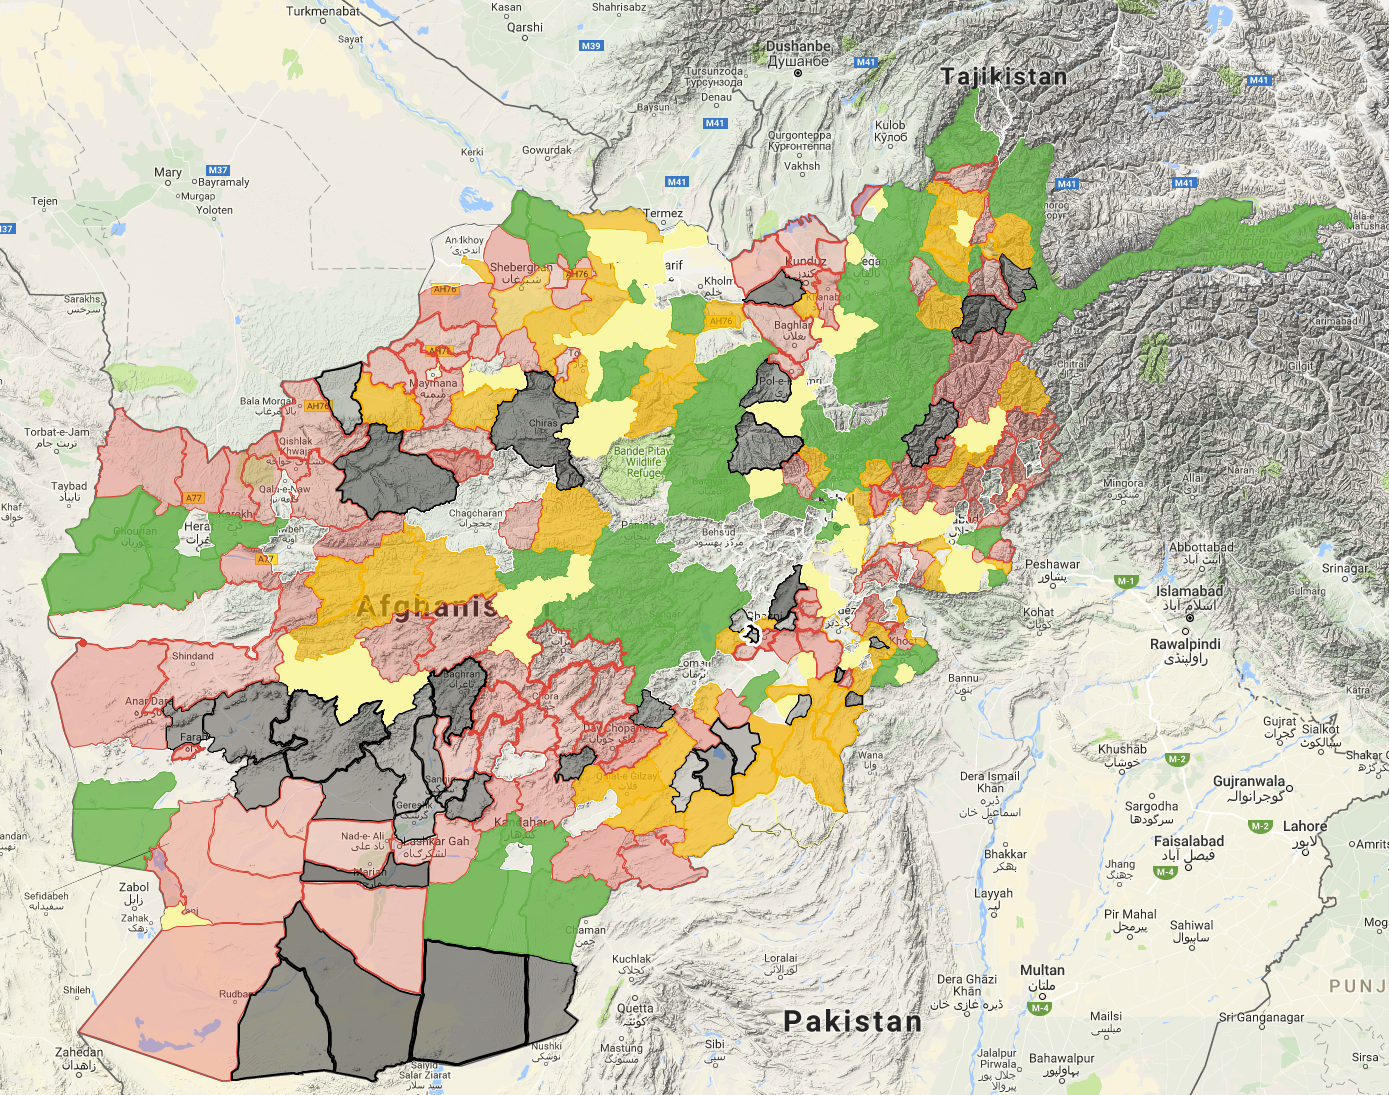 Taliban Releases Map of Territory It Controls in Afghanistan